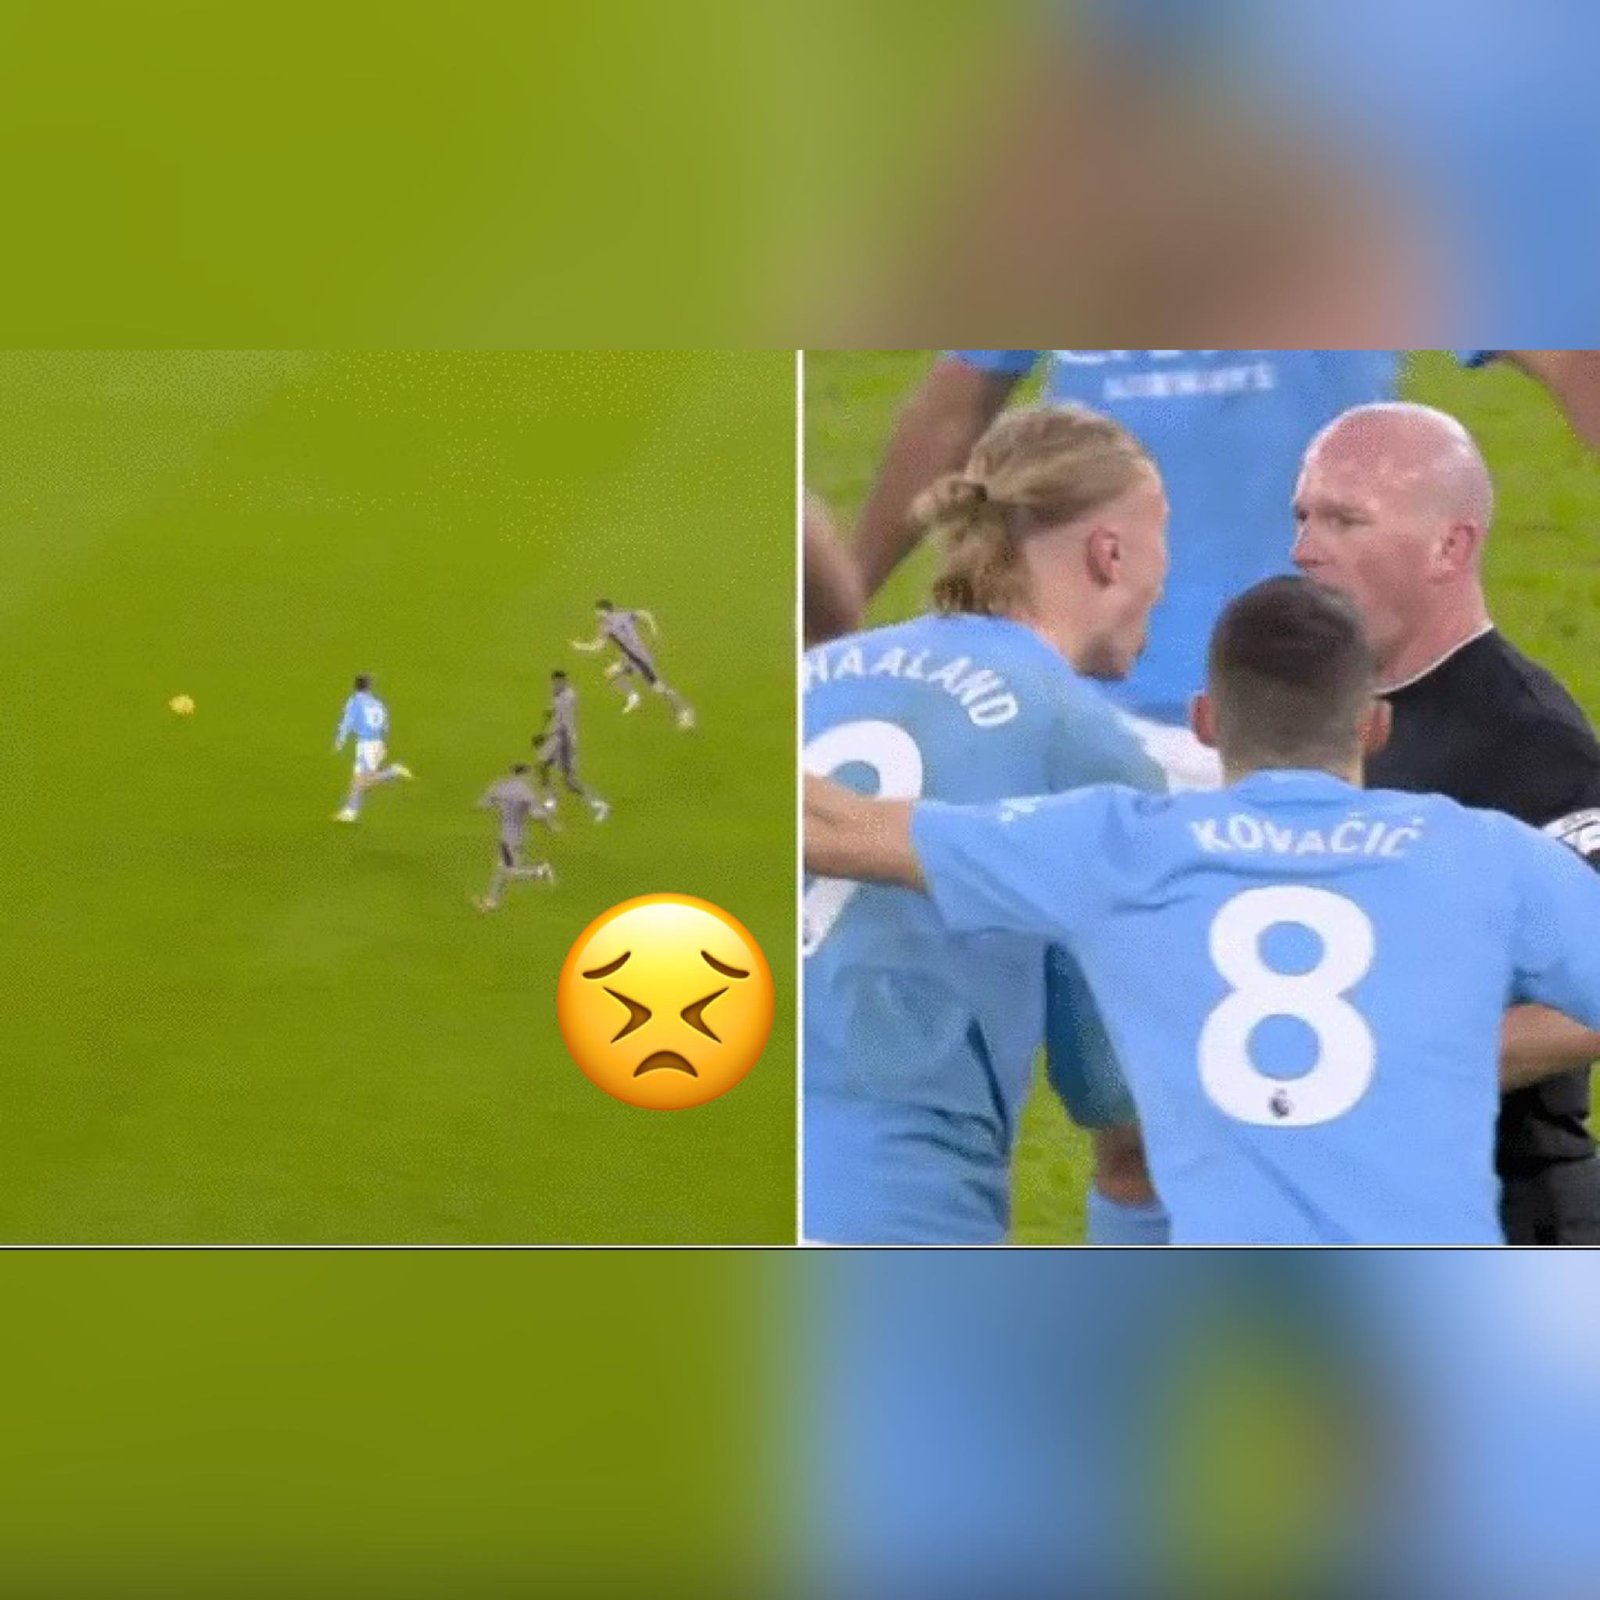 "But in the end" - The reason why Manchester City players was furious at referee Simon Hooper amid Jack Grealish goal denied vs Tottenham Hotspur